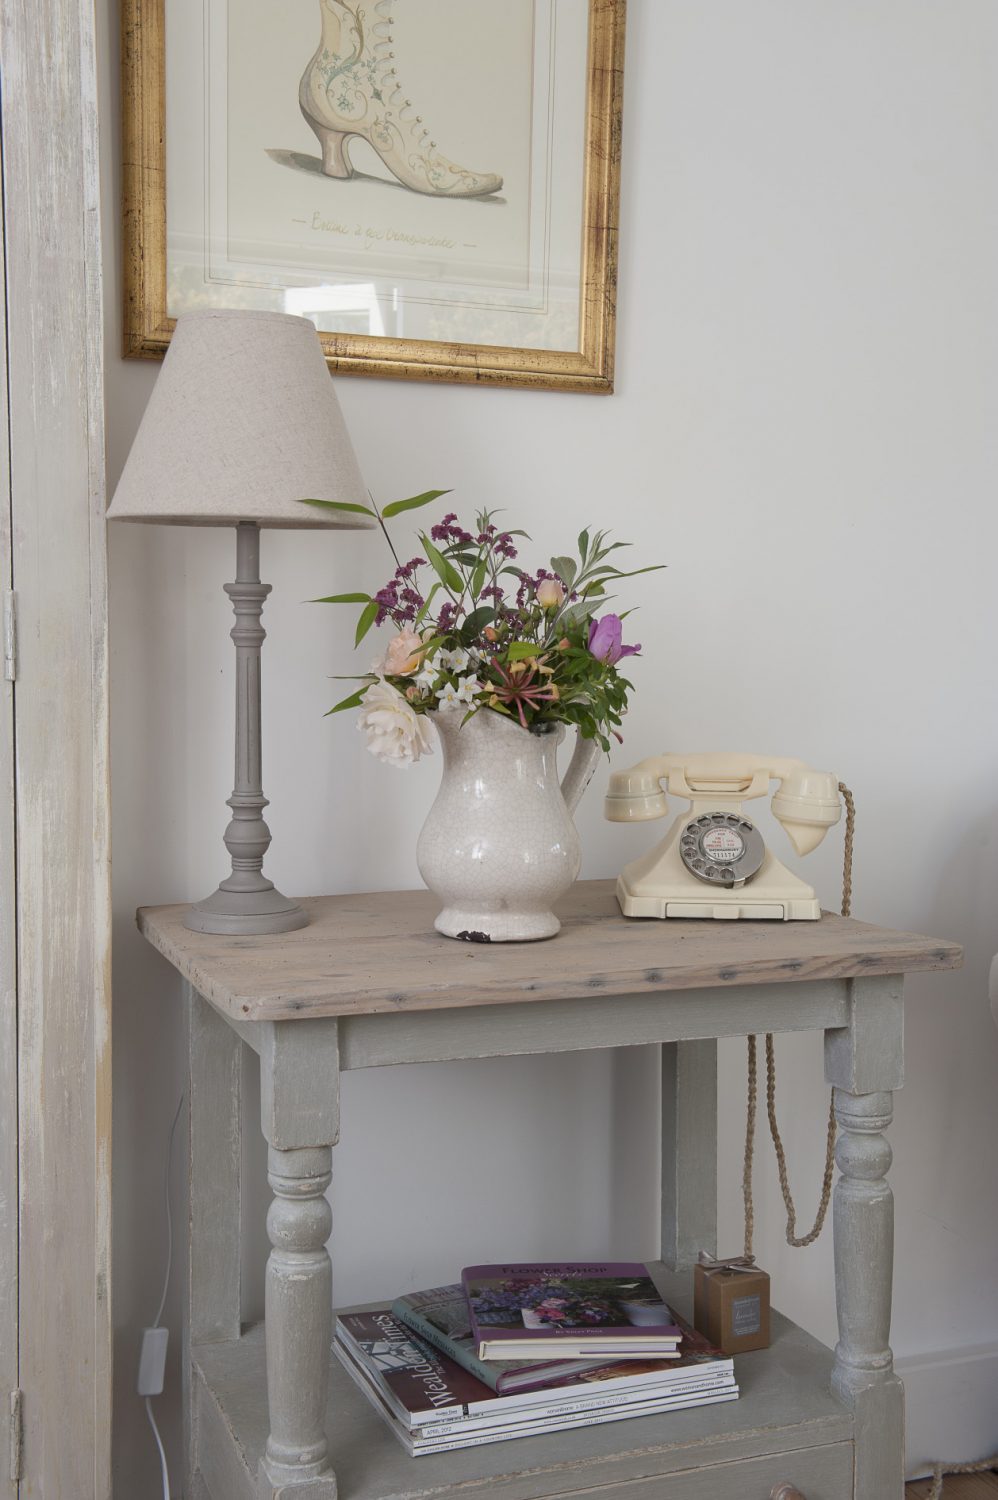 Farrow & Ball’s ‘All White’, used throughout the house, cleverly provides subtle variations of shade depending on the quality of the light and the angle it strikes wall or ceiling